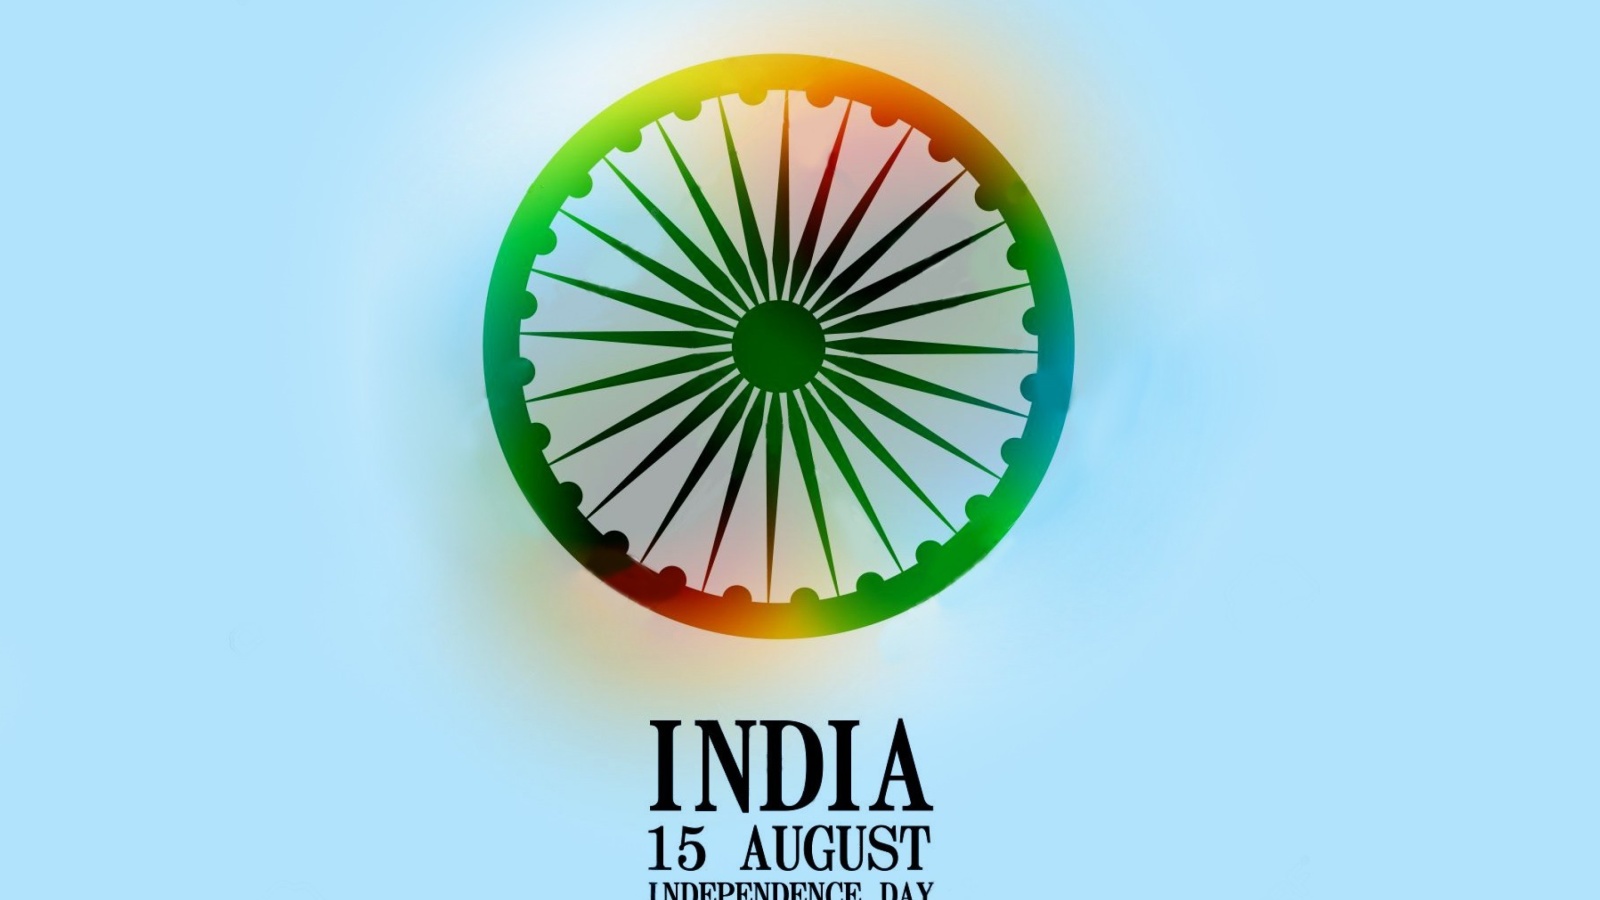 India Independence Day 15 August screenshot #1 1600x900